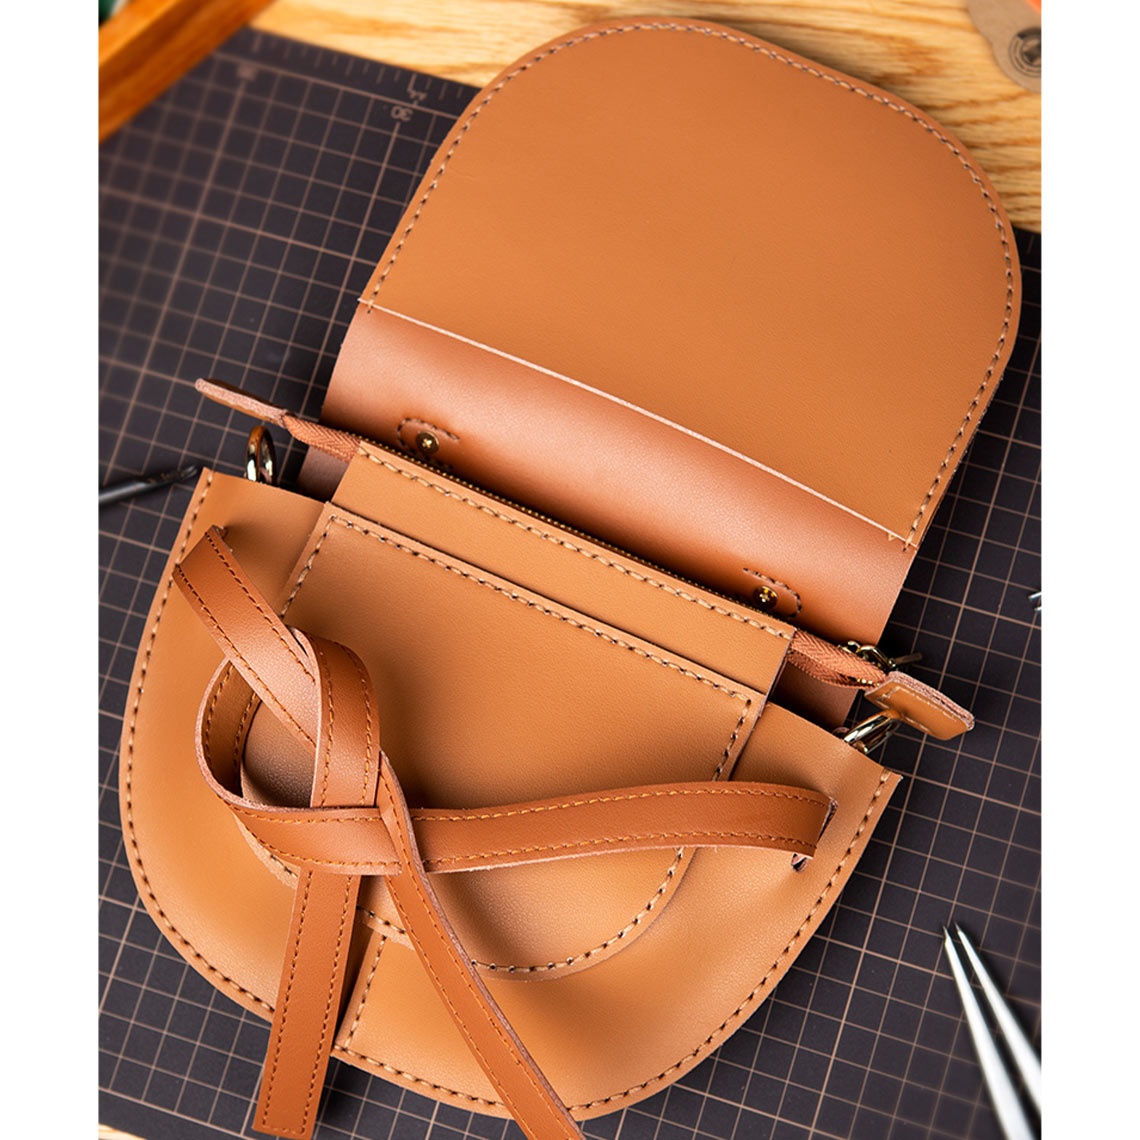 Tan saddle bag with a belt style  | POPSEWING